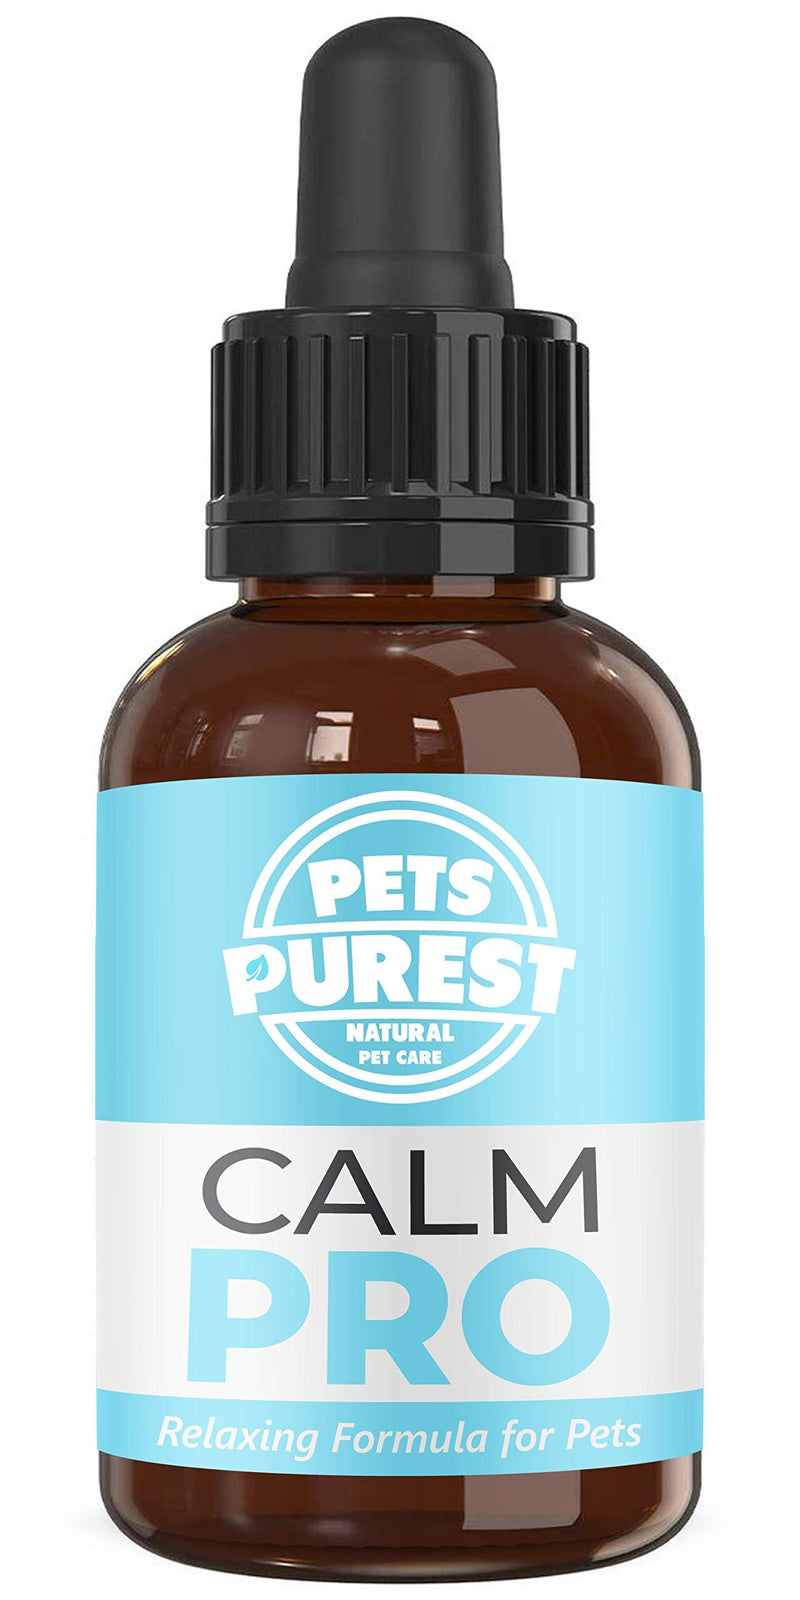 Pets Purest 100% Natural Calm PRO Dog Anxiety Relief Calming Aid Supplement for Dogs Cats Horses Rabbits Birds Pets. Anxiety & Stress When Home Alone, Aggression, Loud Noises, Fireworks & Kennels 50ml - PawsPlanet Australia